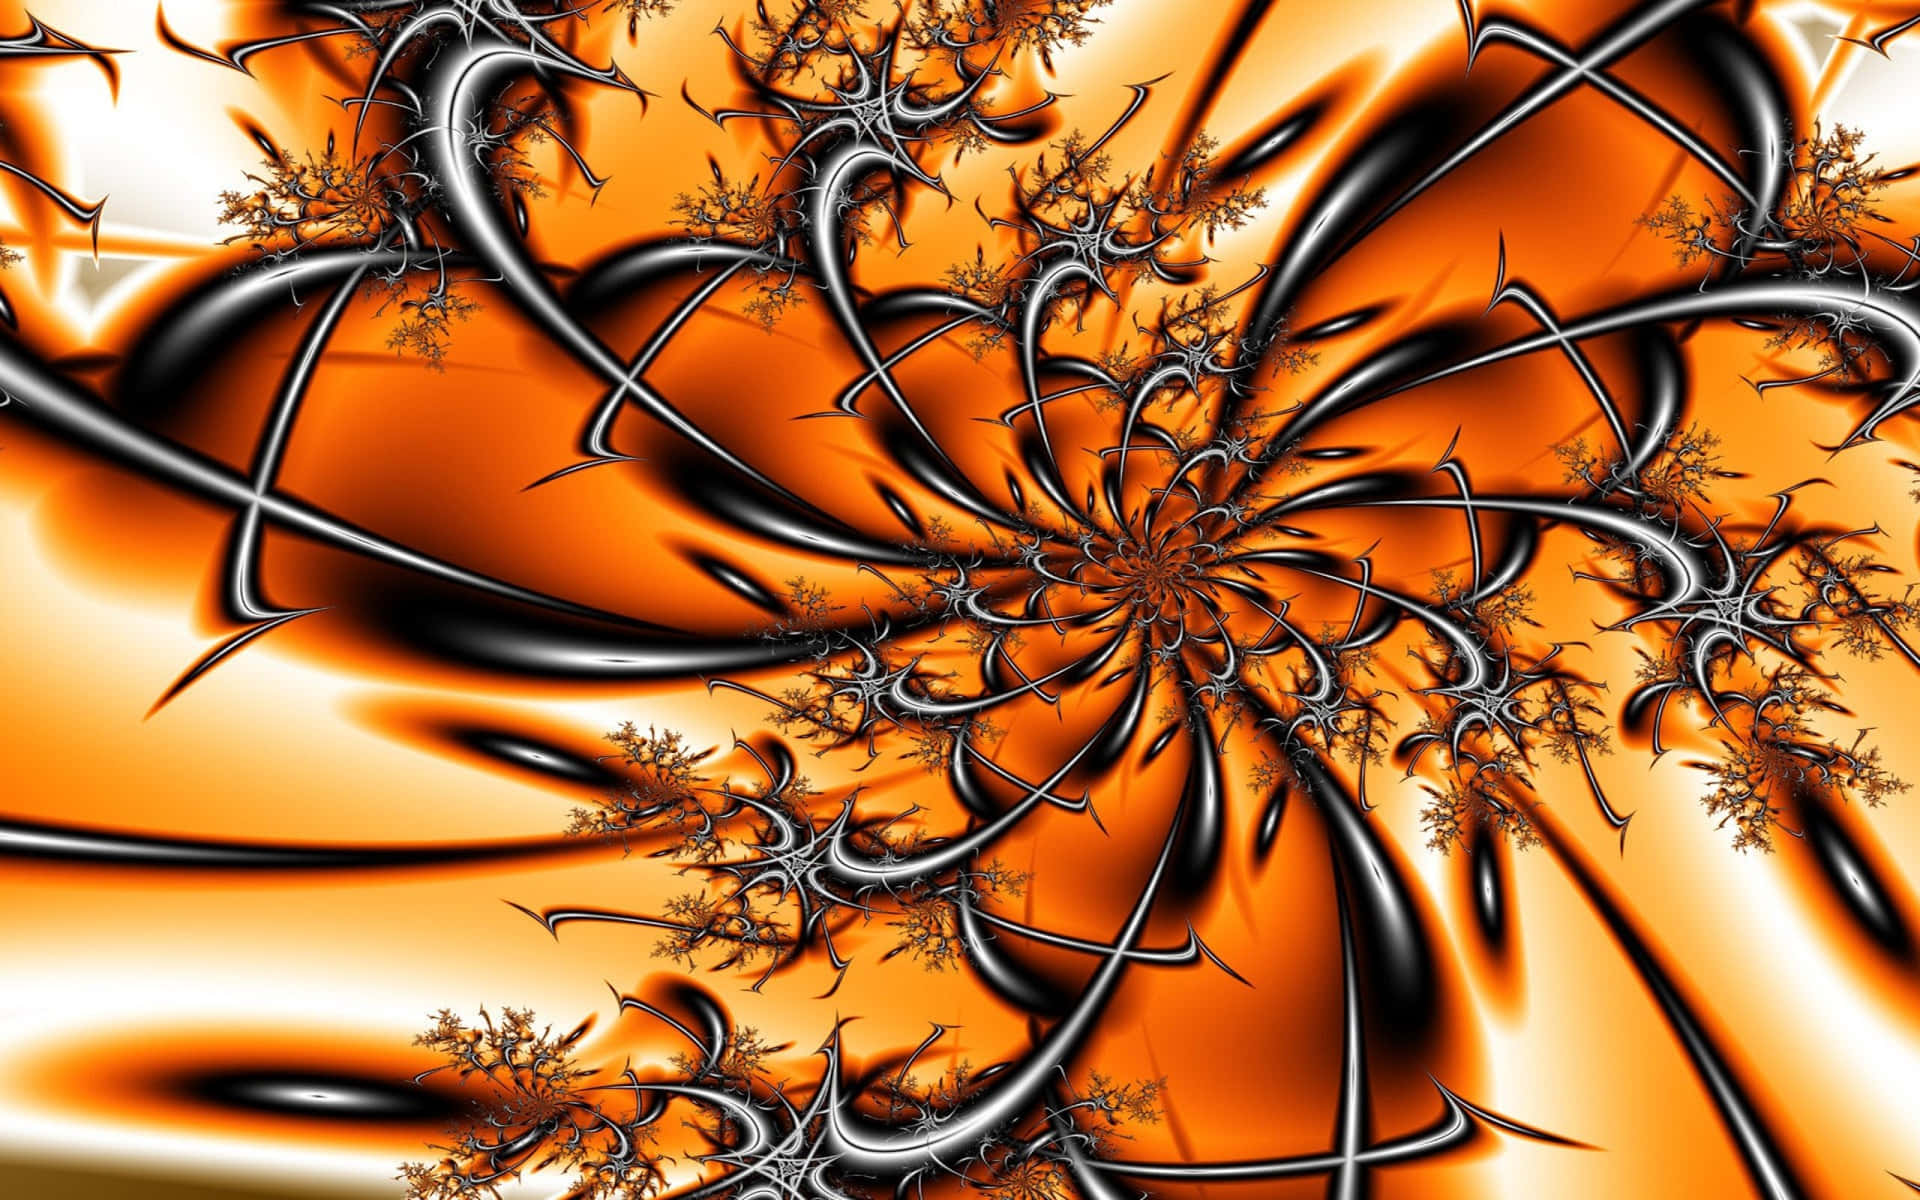 Captivating Swirls of Abstract Artistic Expression